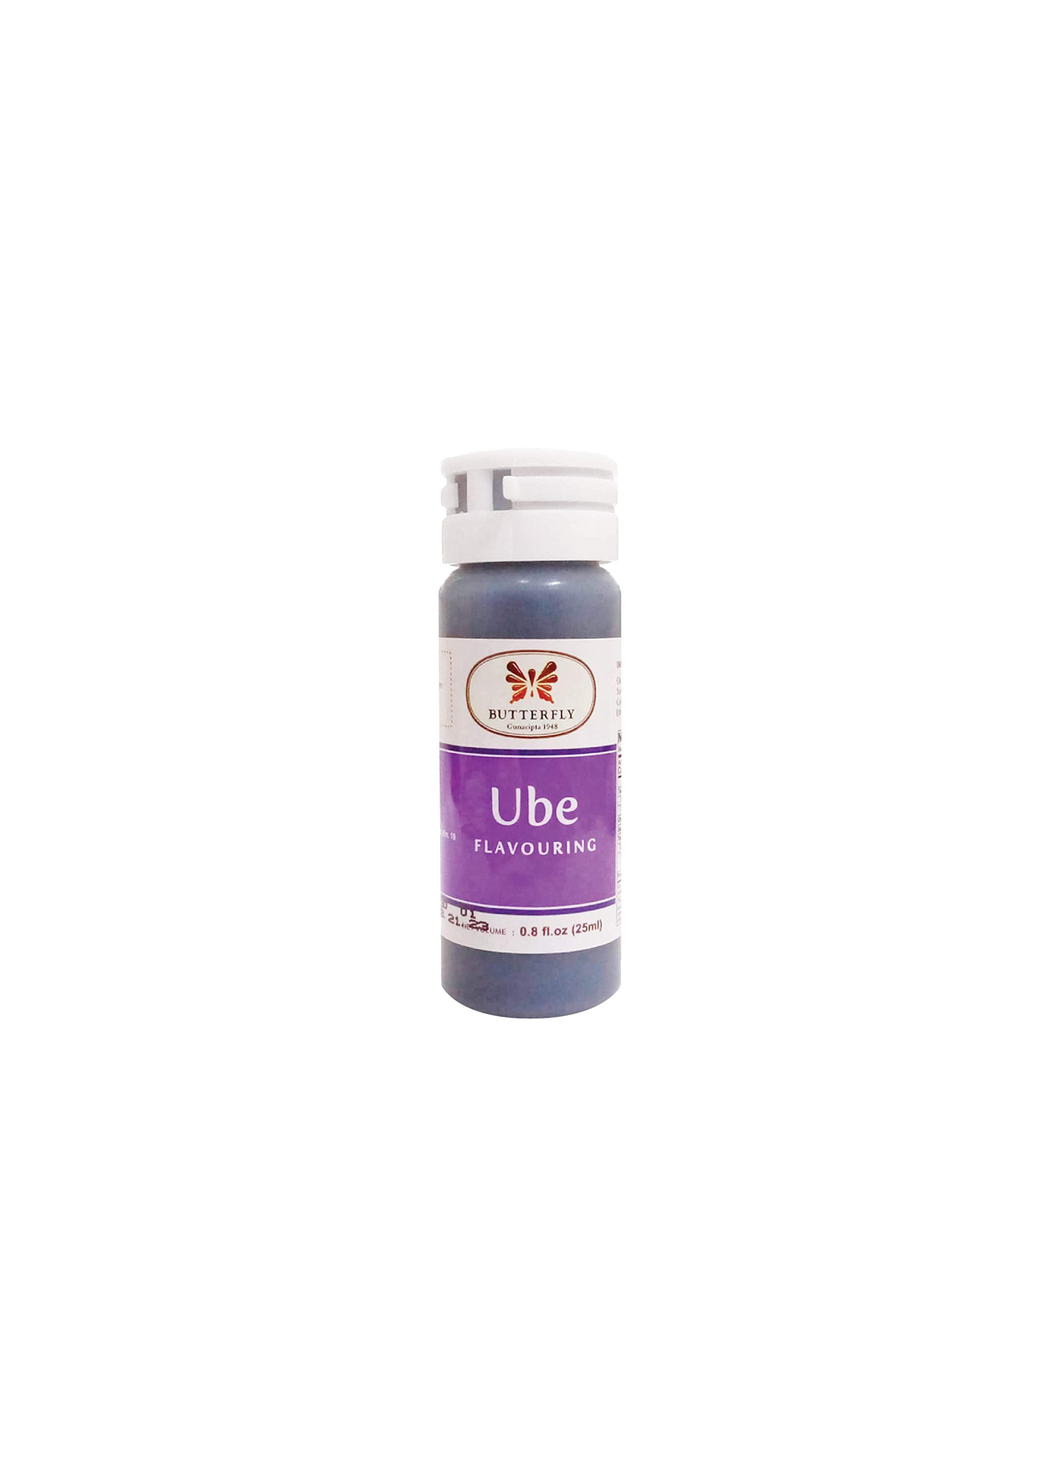 Butterfly Ube Flavoring 25ml